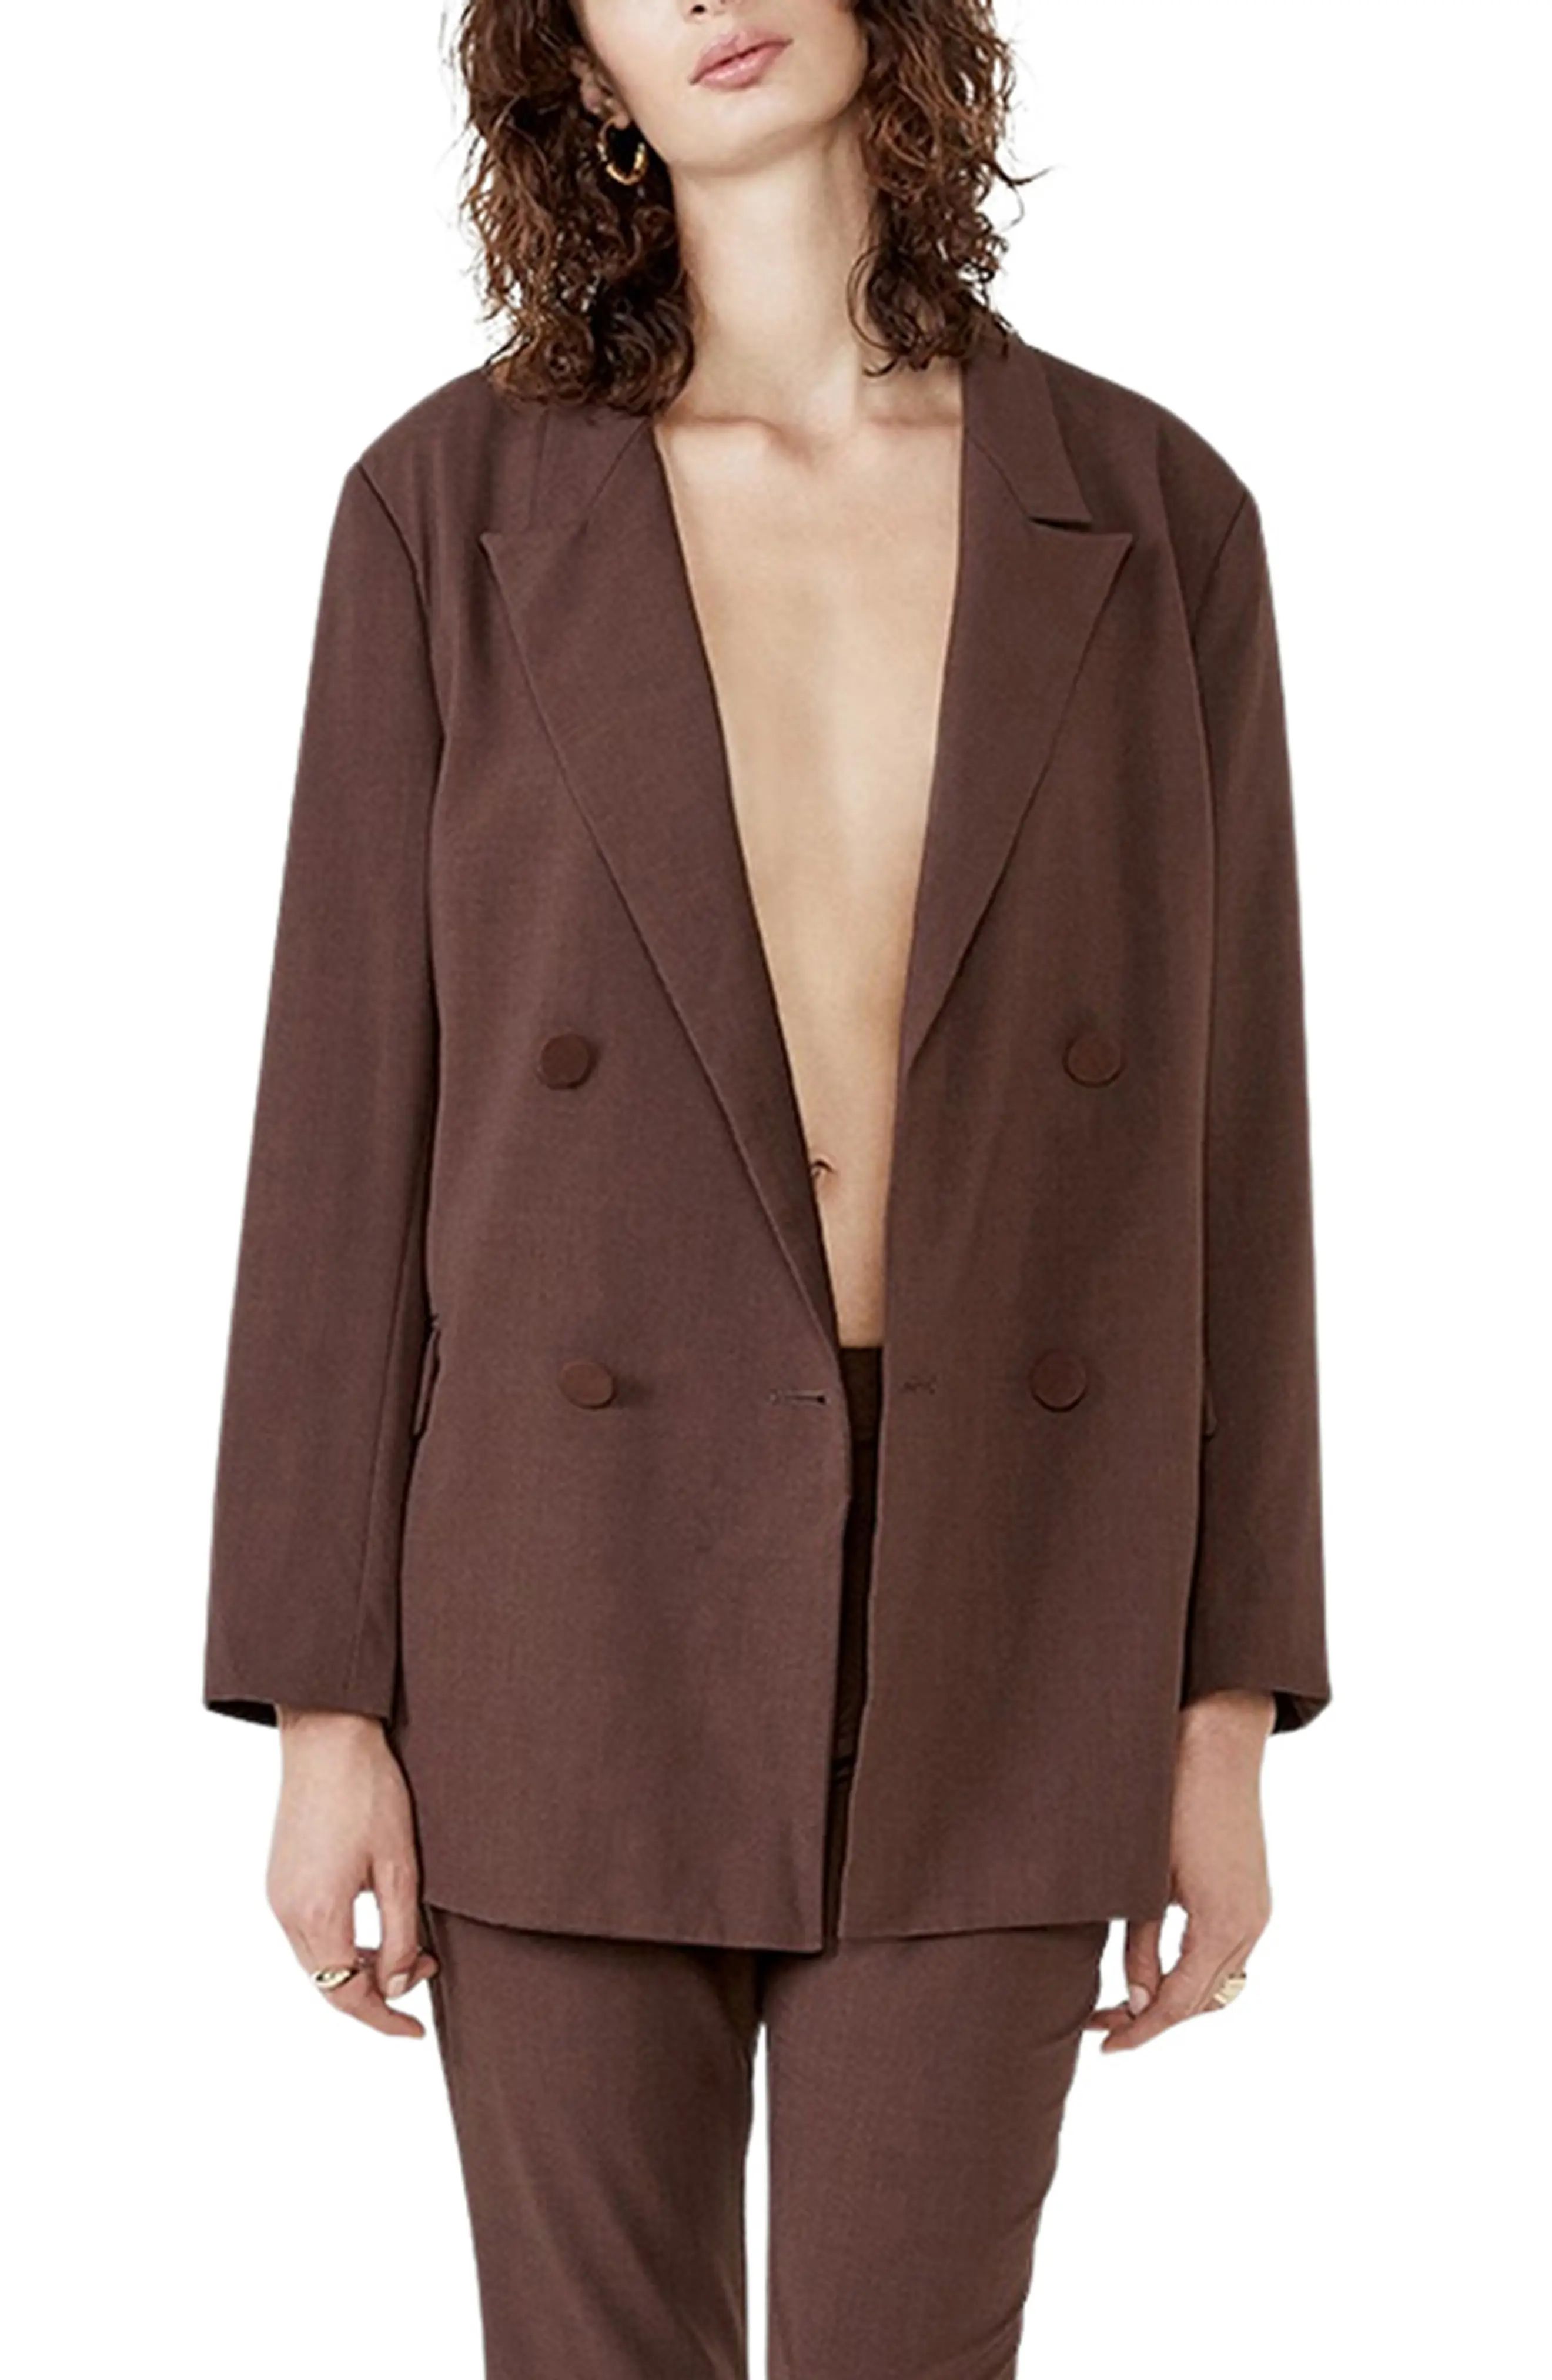 Bardot The Oversize Blazer, Size X-Small in Chocolate at Nordstrom | Nordstrom